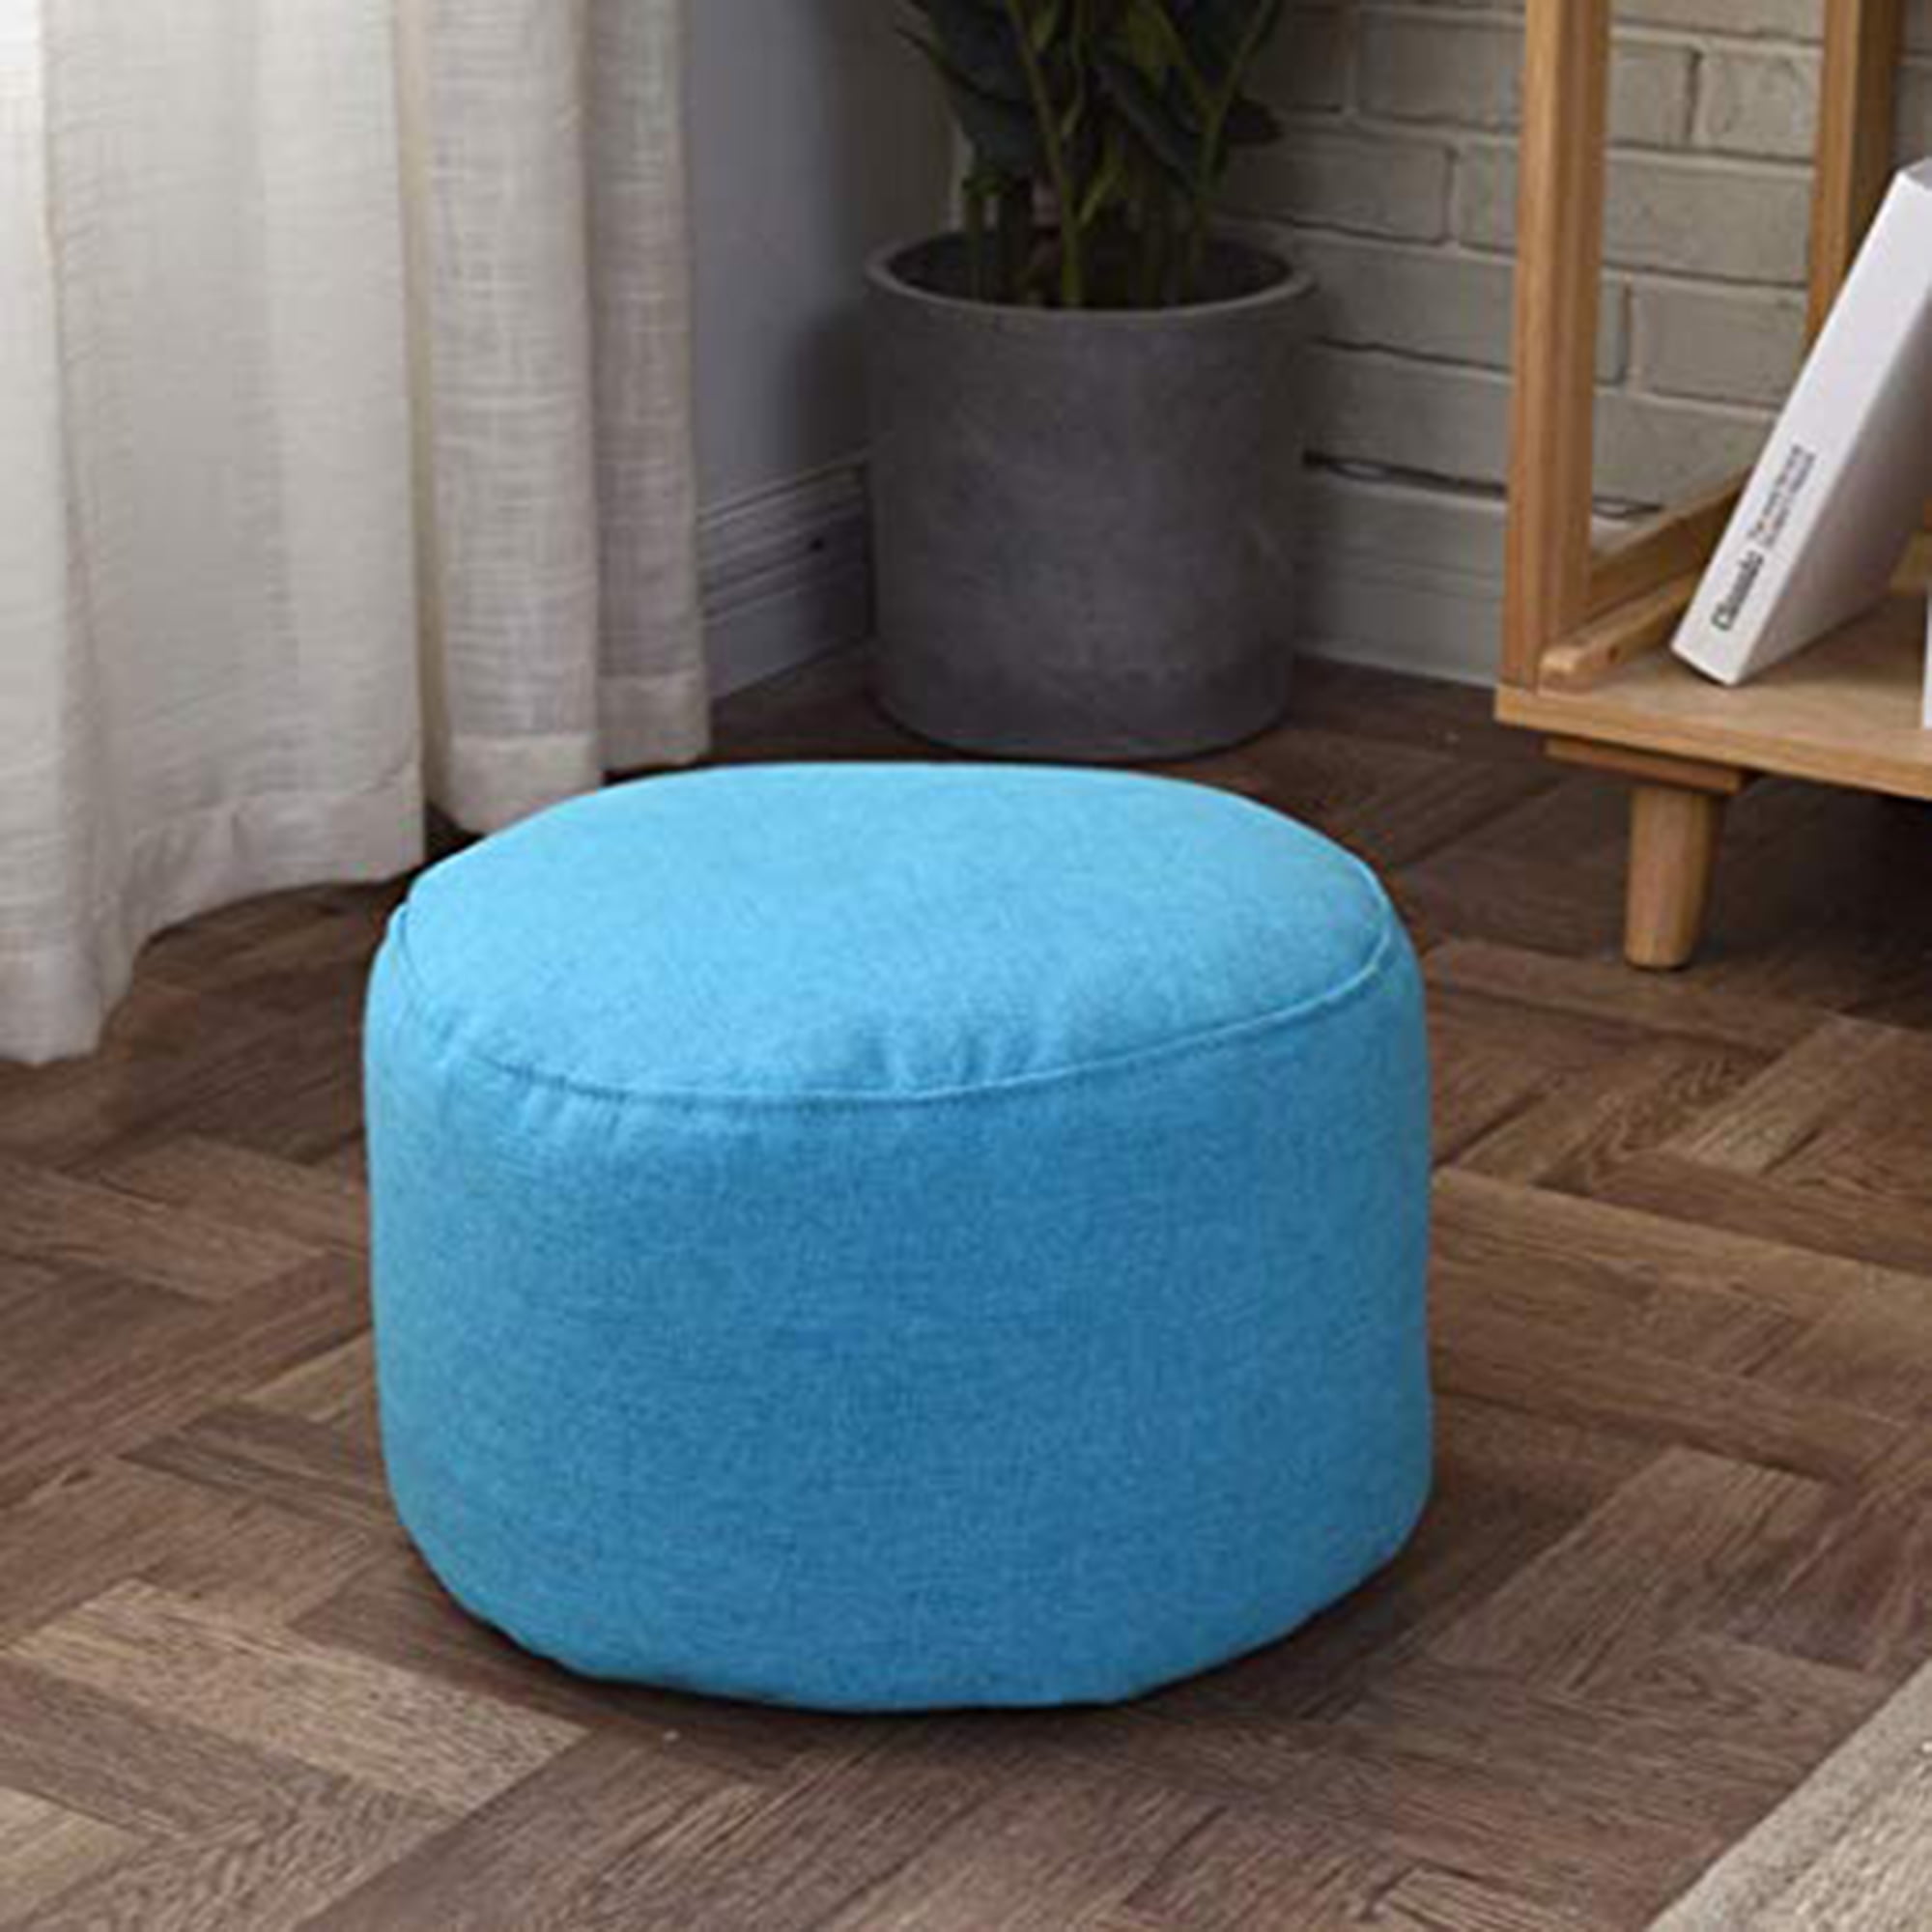 Details about   Indian Home Decor Cotton Hippie Chair Pouf ottoman Cover Footstool Beautiful Art 